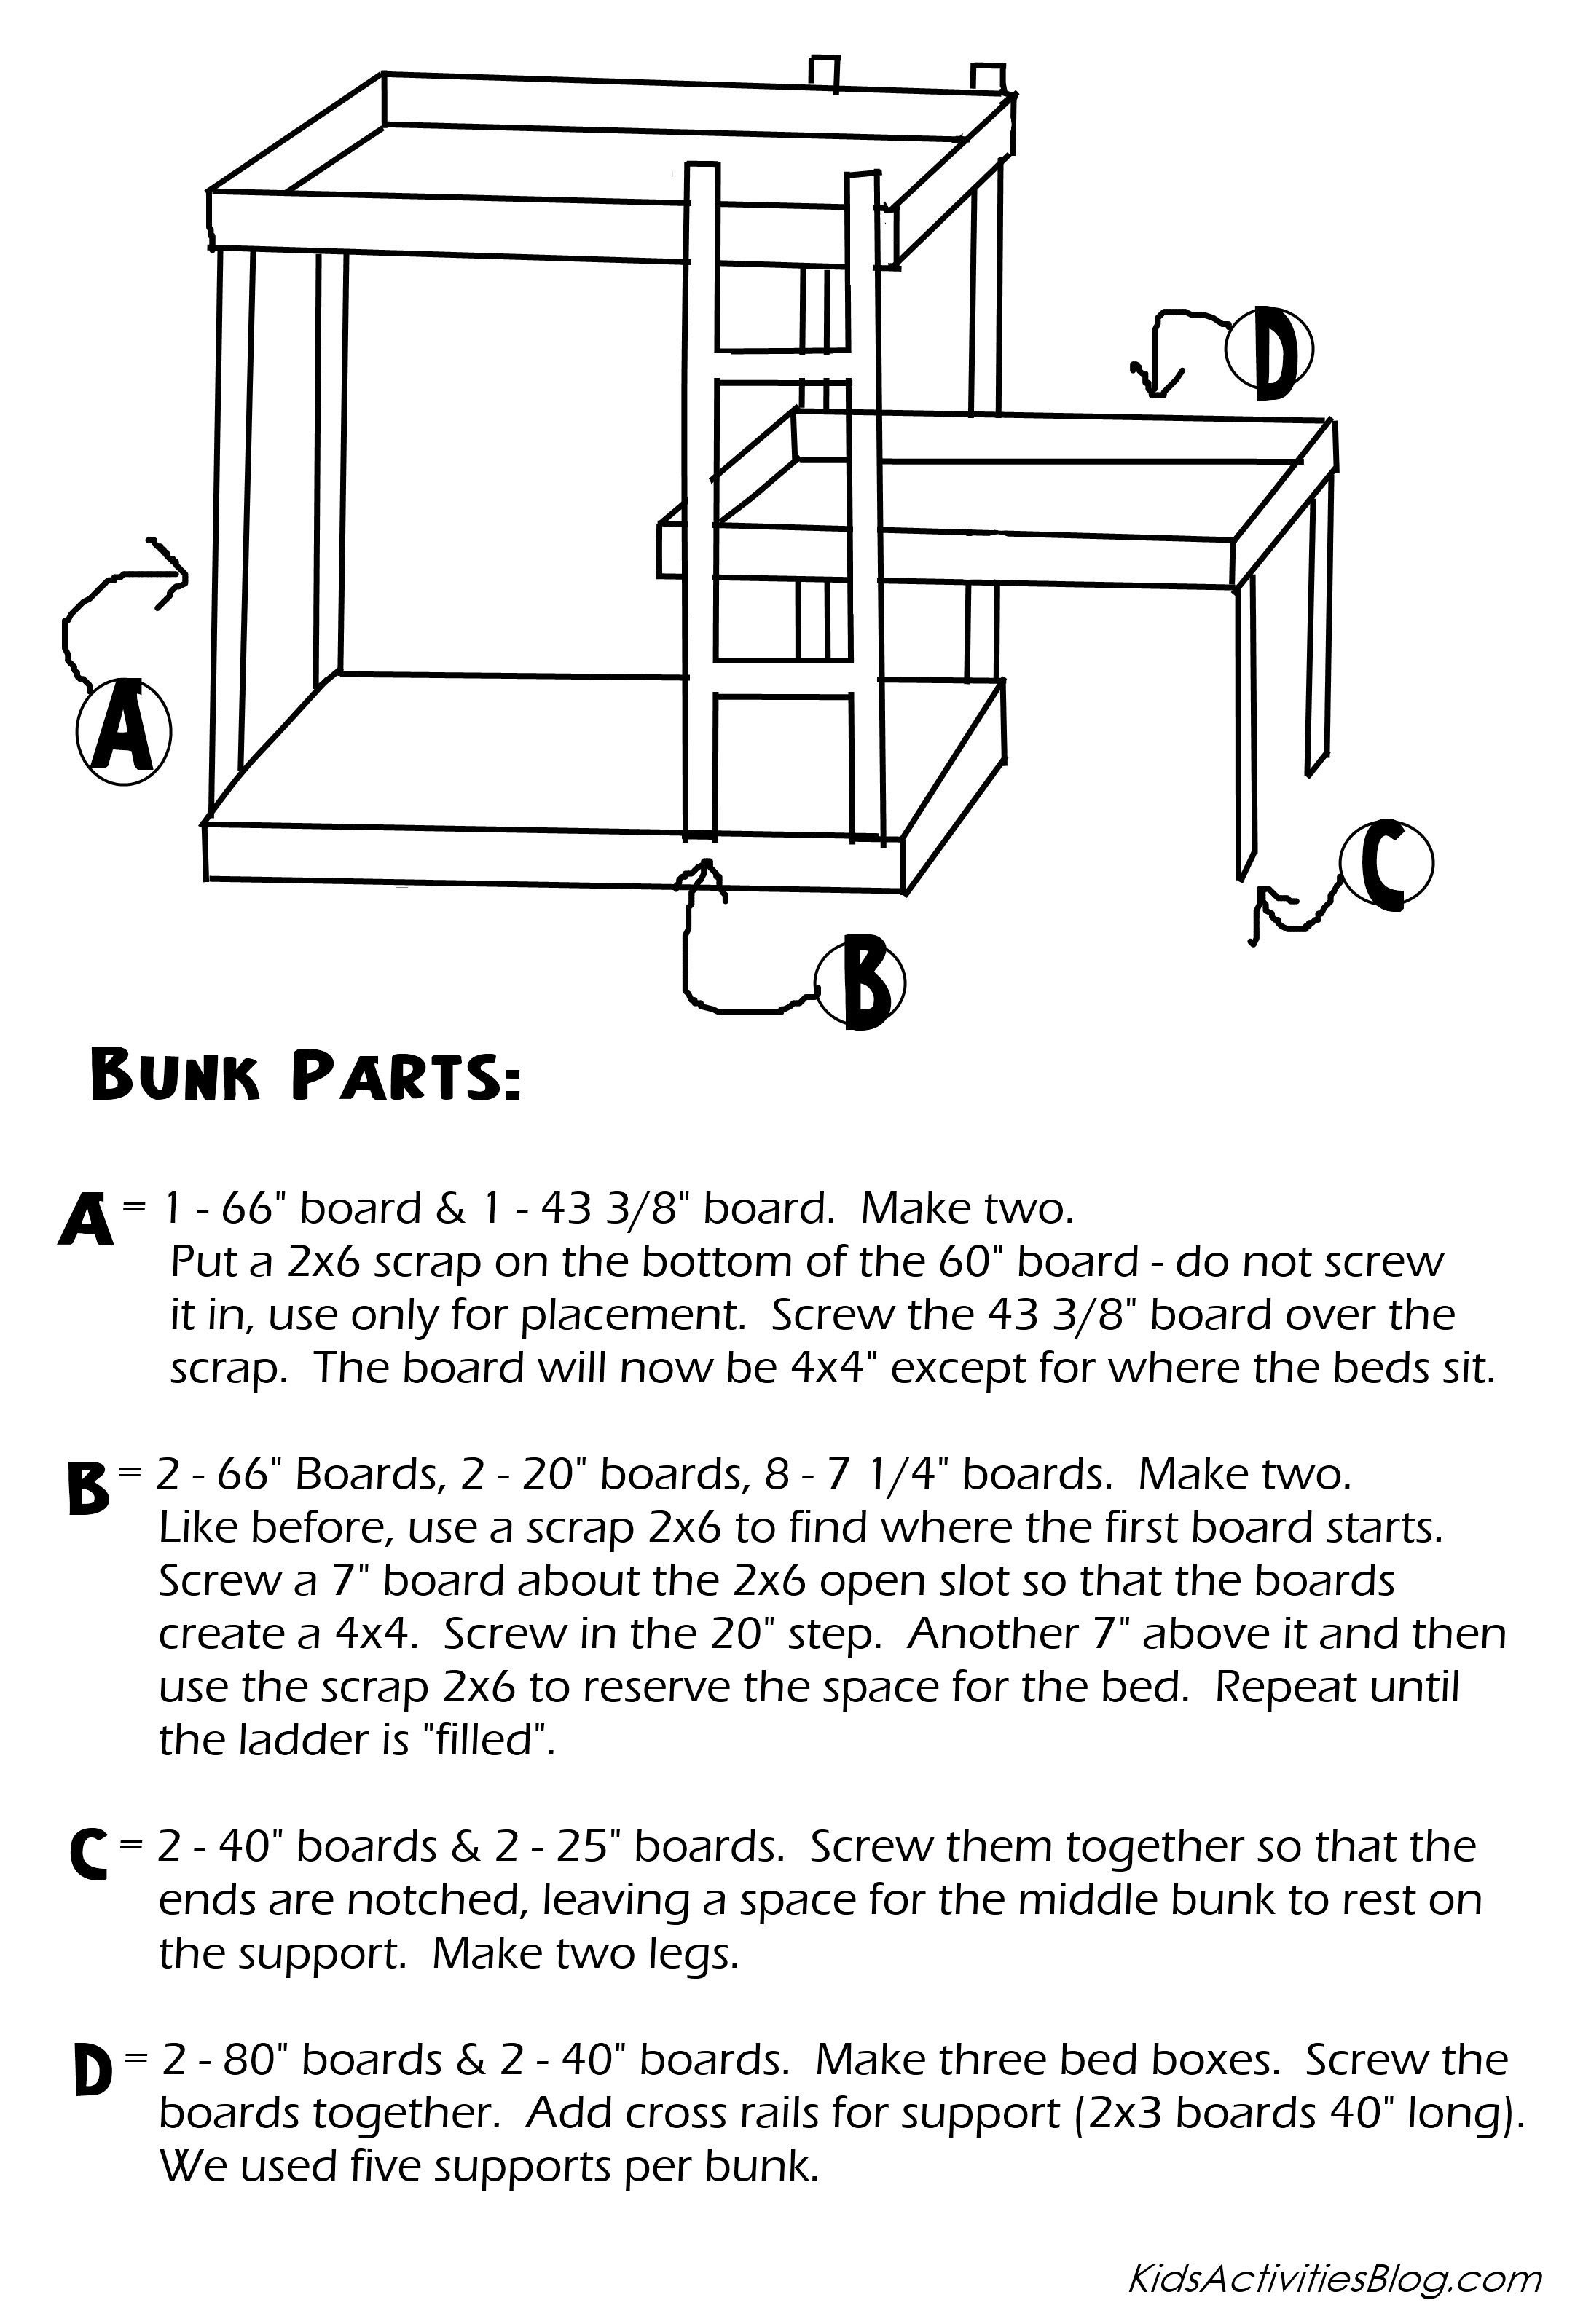 Build A Bed} Free Plans for Triple Bunk Beds - Kids Activities Blog